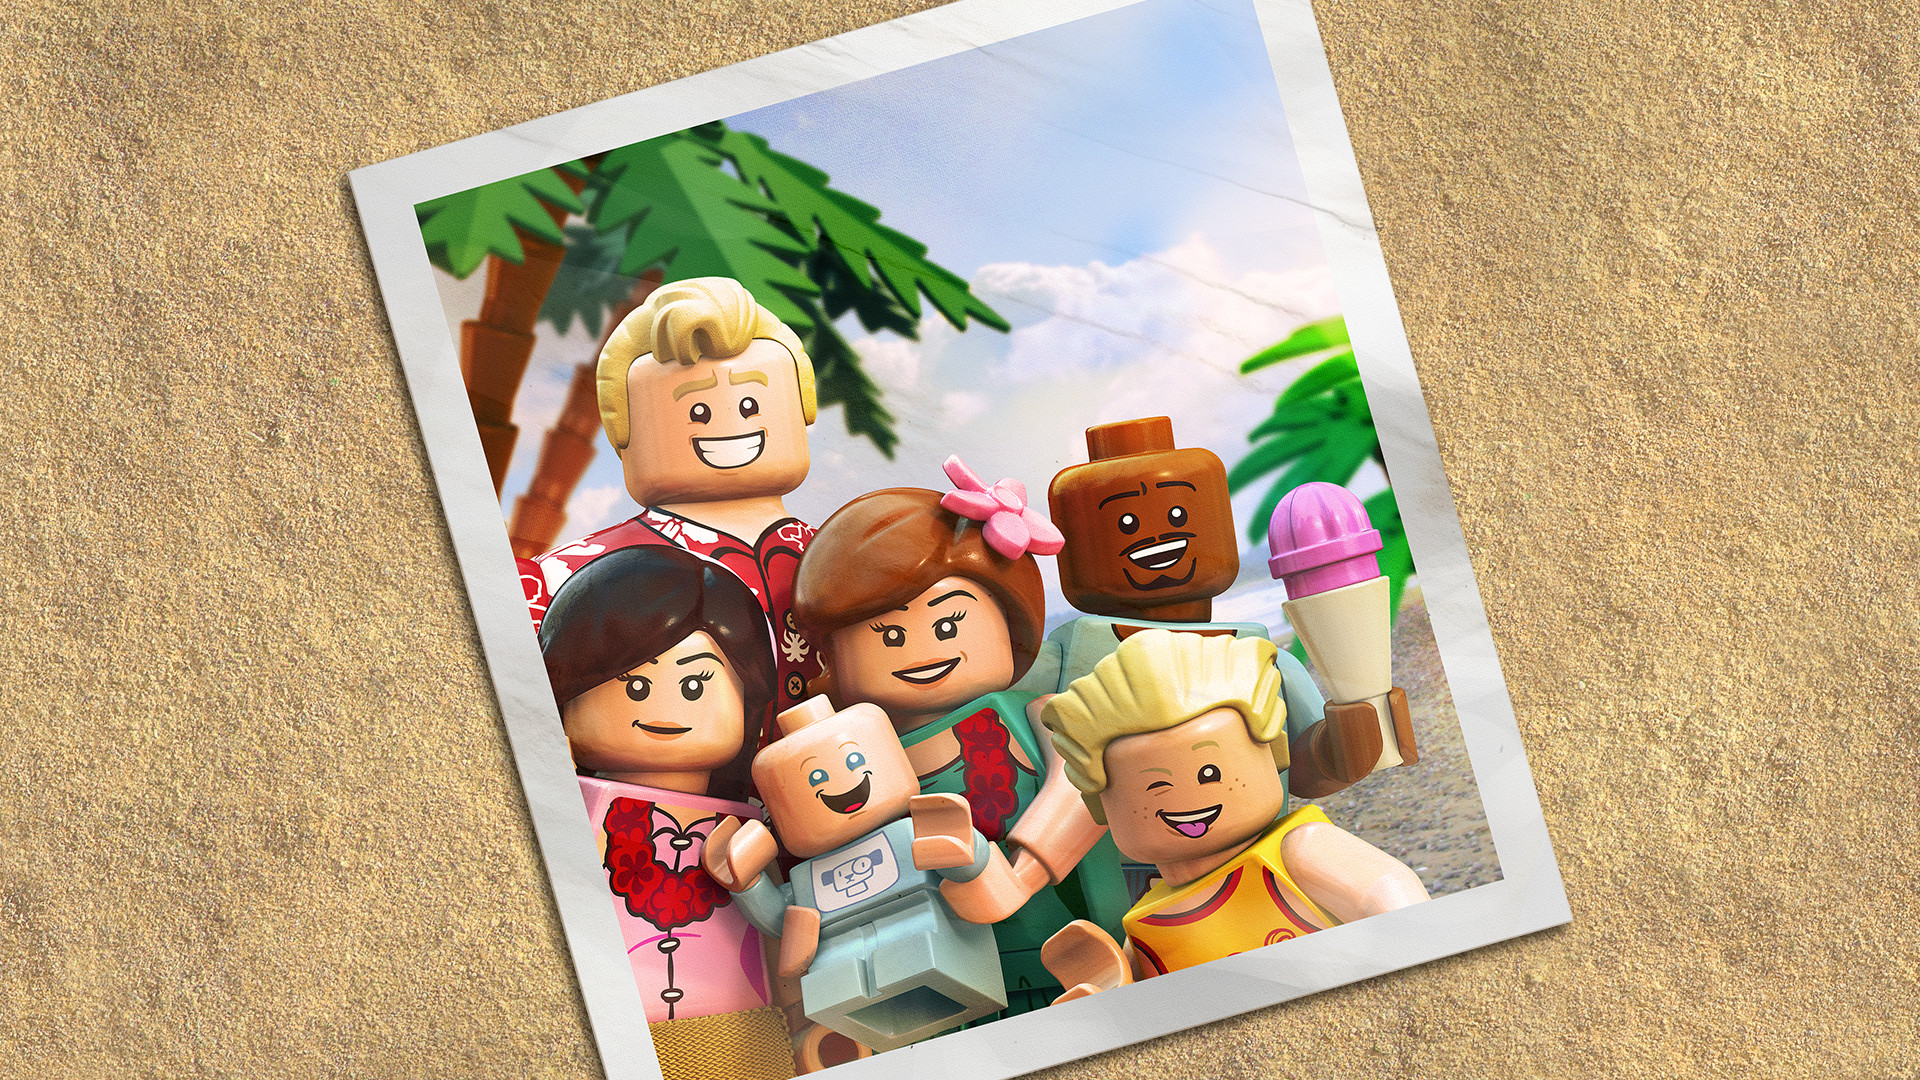 LEGO THE INCREDIBLES - Parr Family Vacation Character Pack DLC EU PS5 CD Key [USD 0.73]